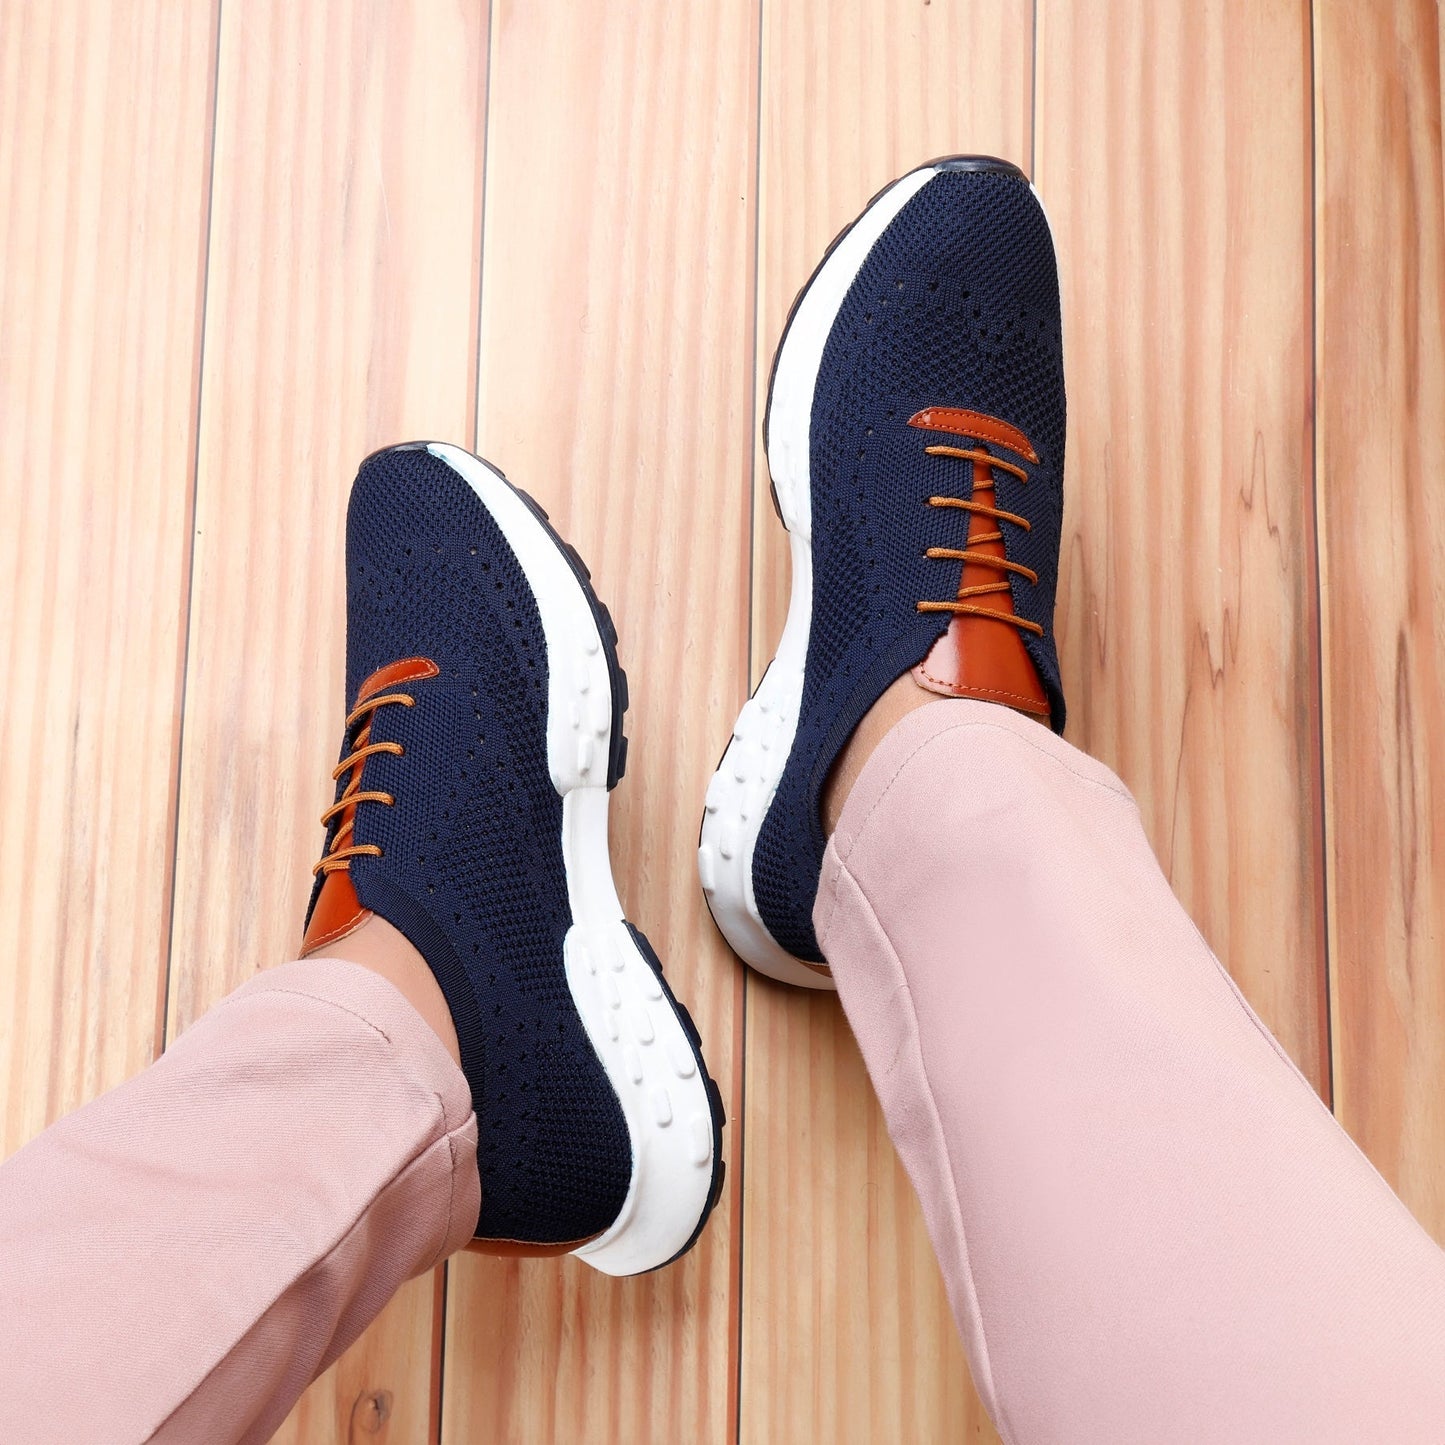 Men's Latest Knitted Casual Sports Lace-Up Shoes